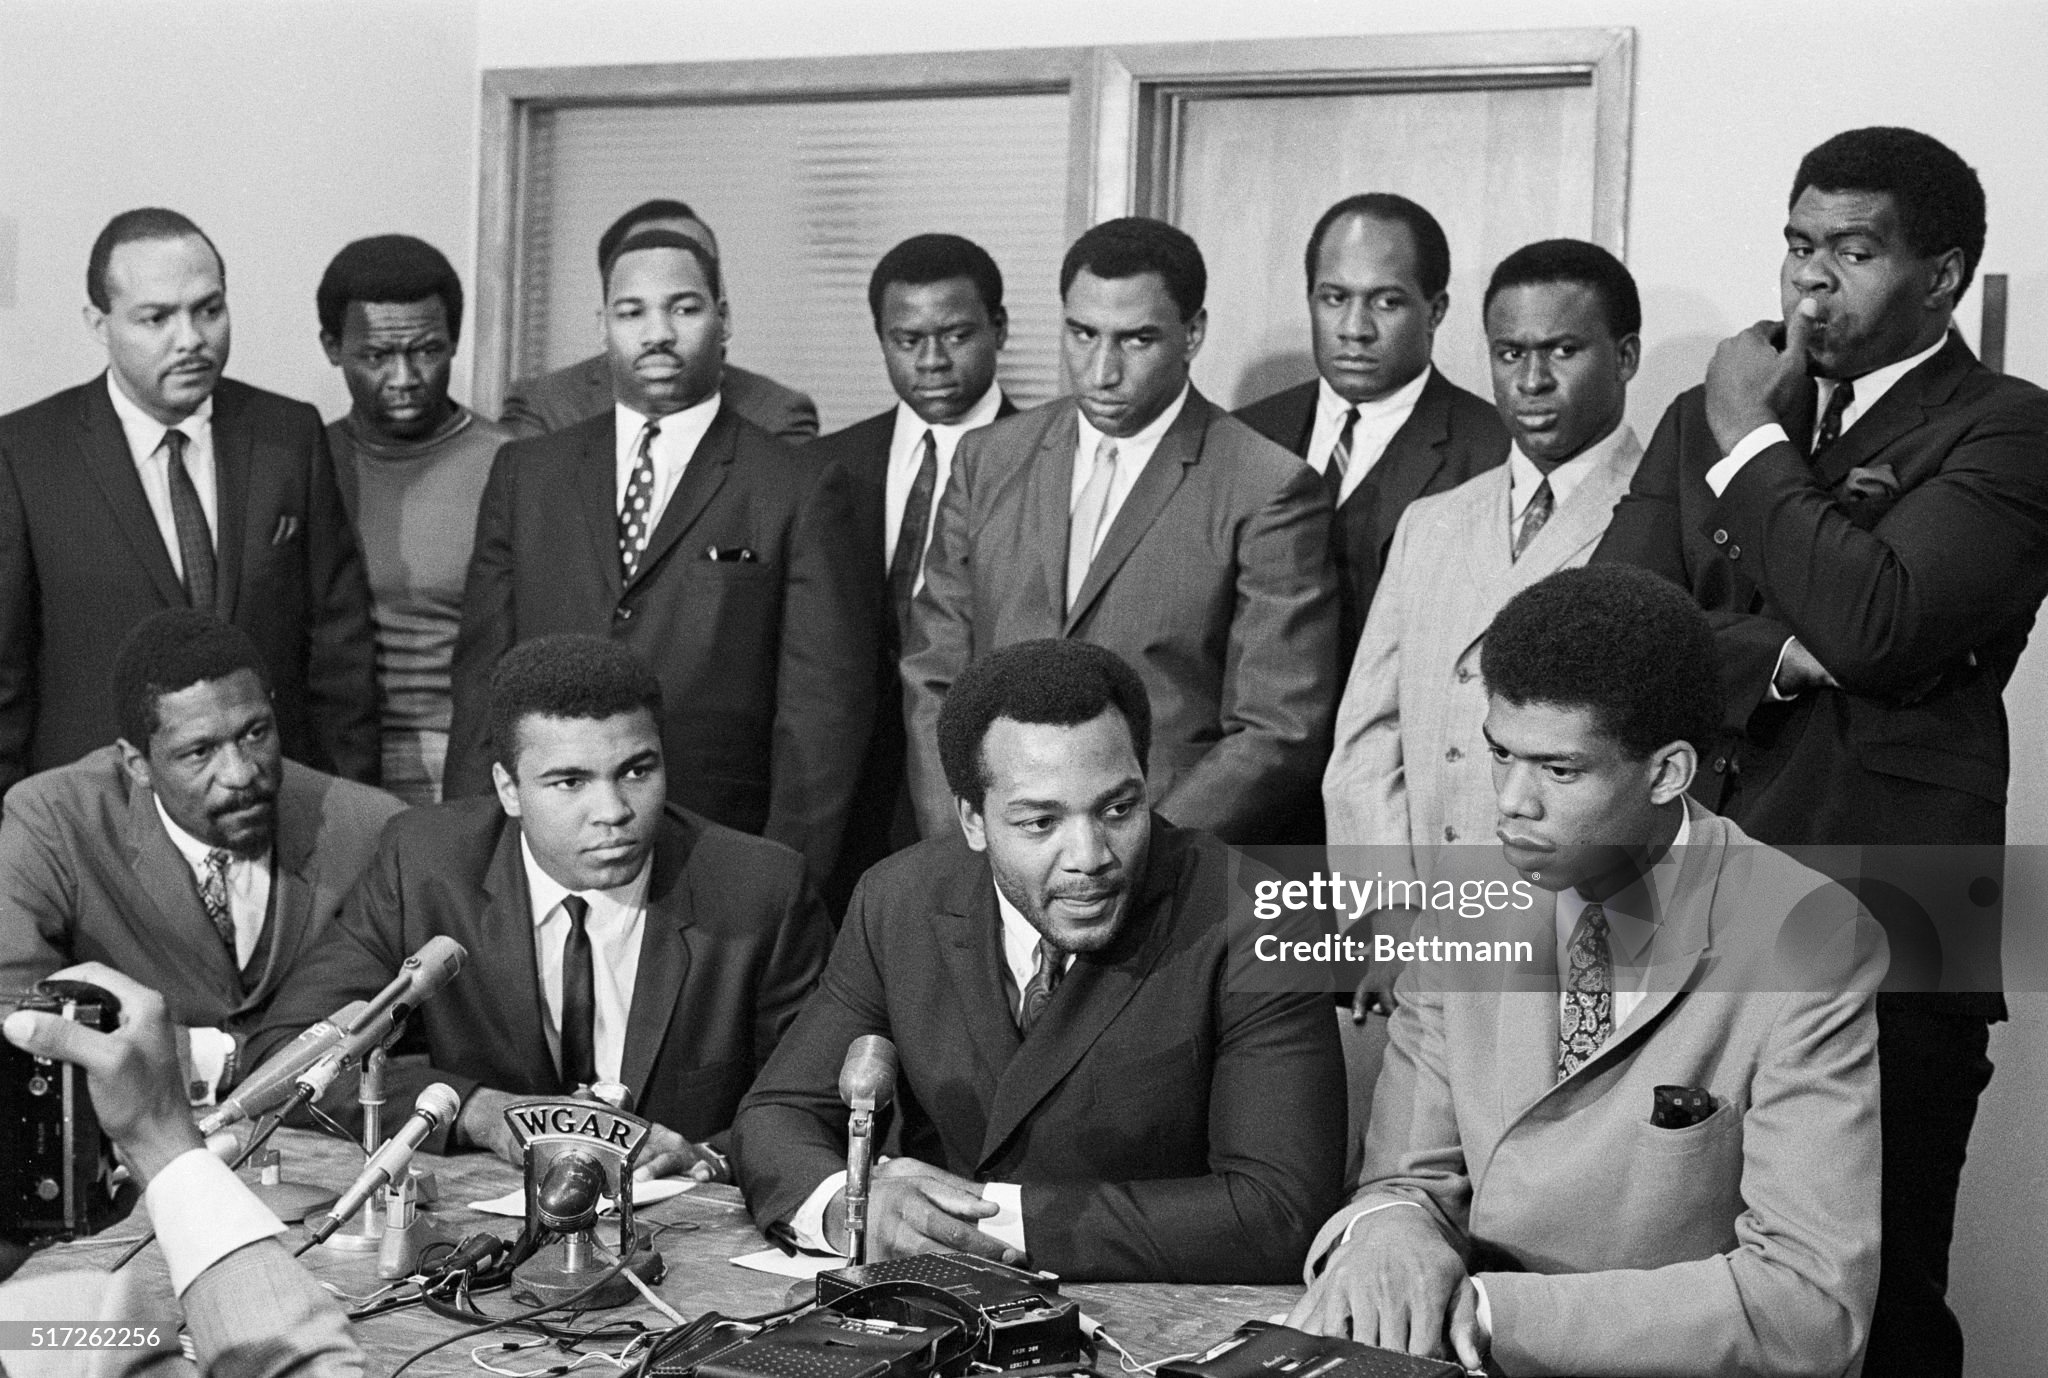 african-american-athletes-at-news-conference.jpg